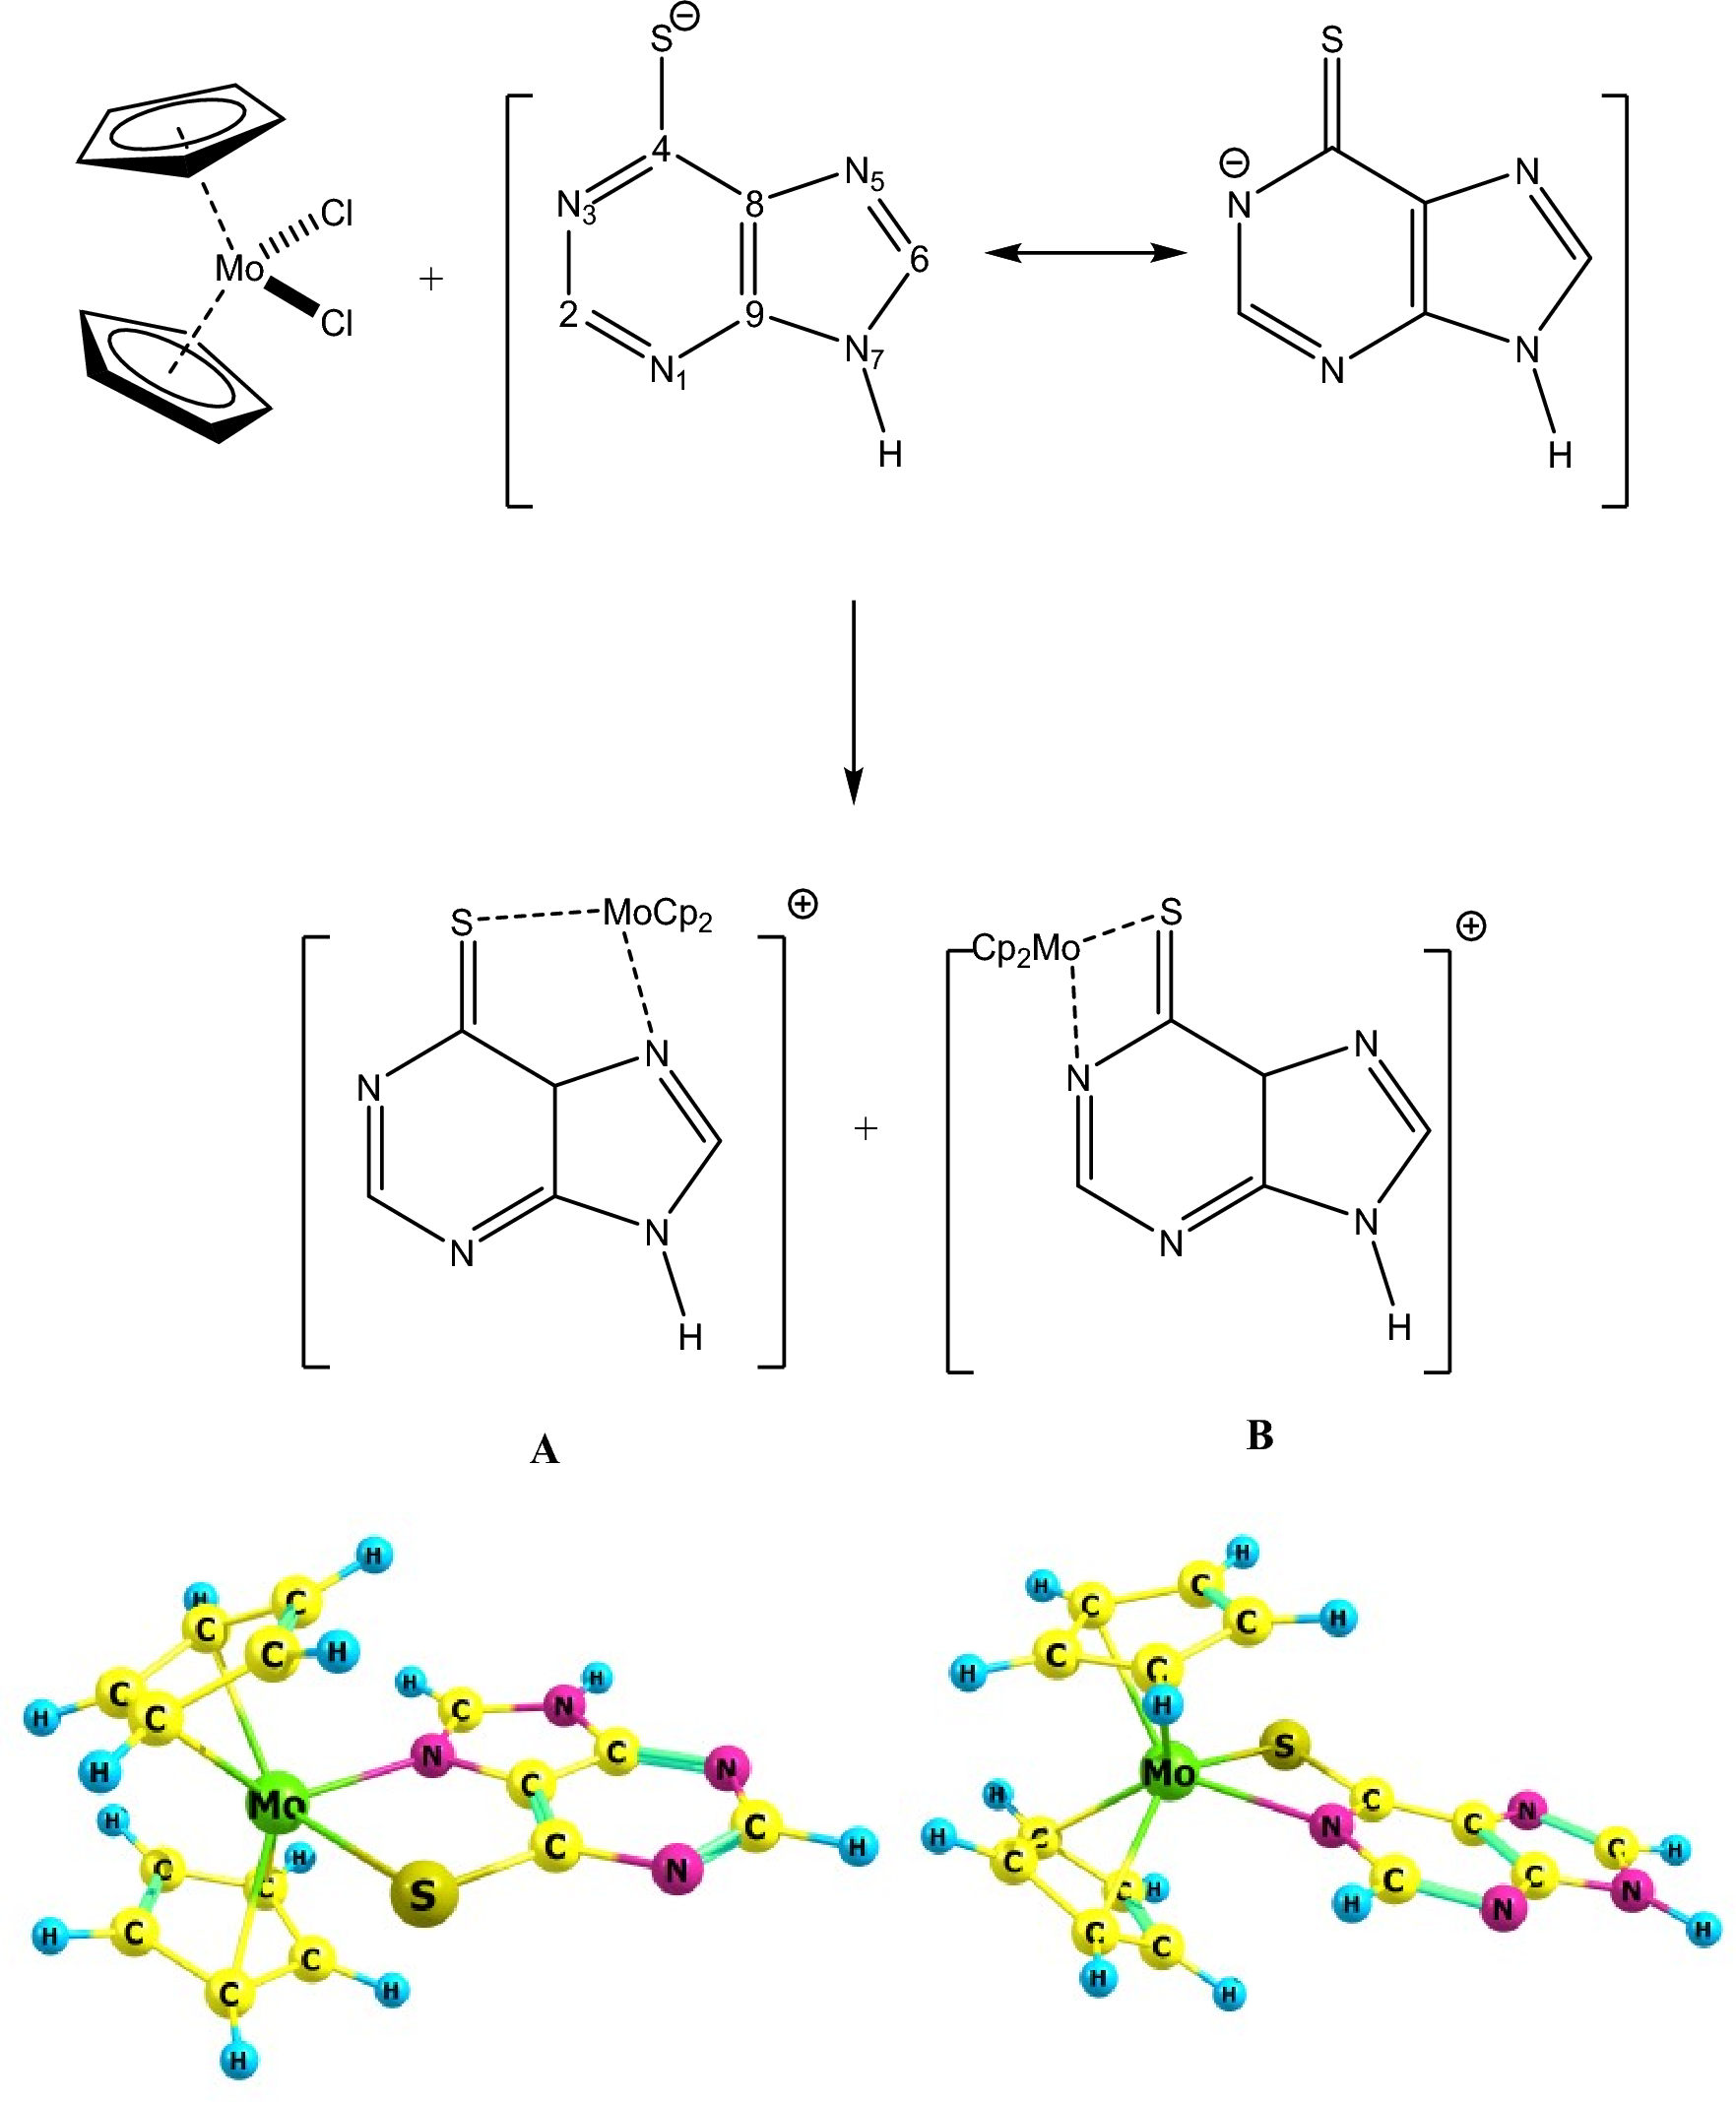 A C-PCM Outlook of Structural and Spectroscopic (IR, 1H NMR) Properties of [Cp2Mo(6-mercaptopurine)]Cl Complex